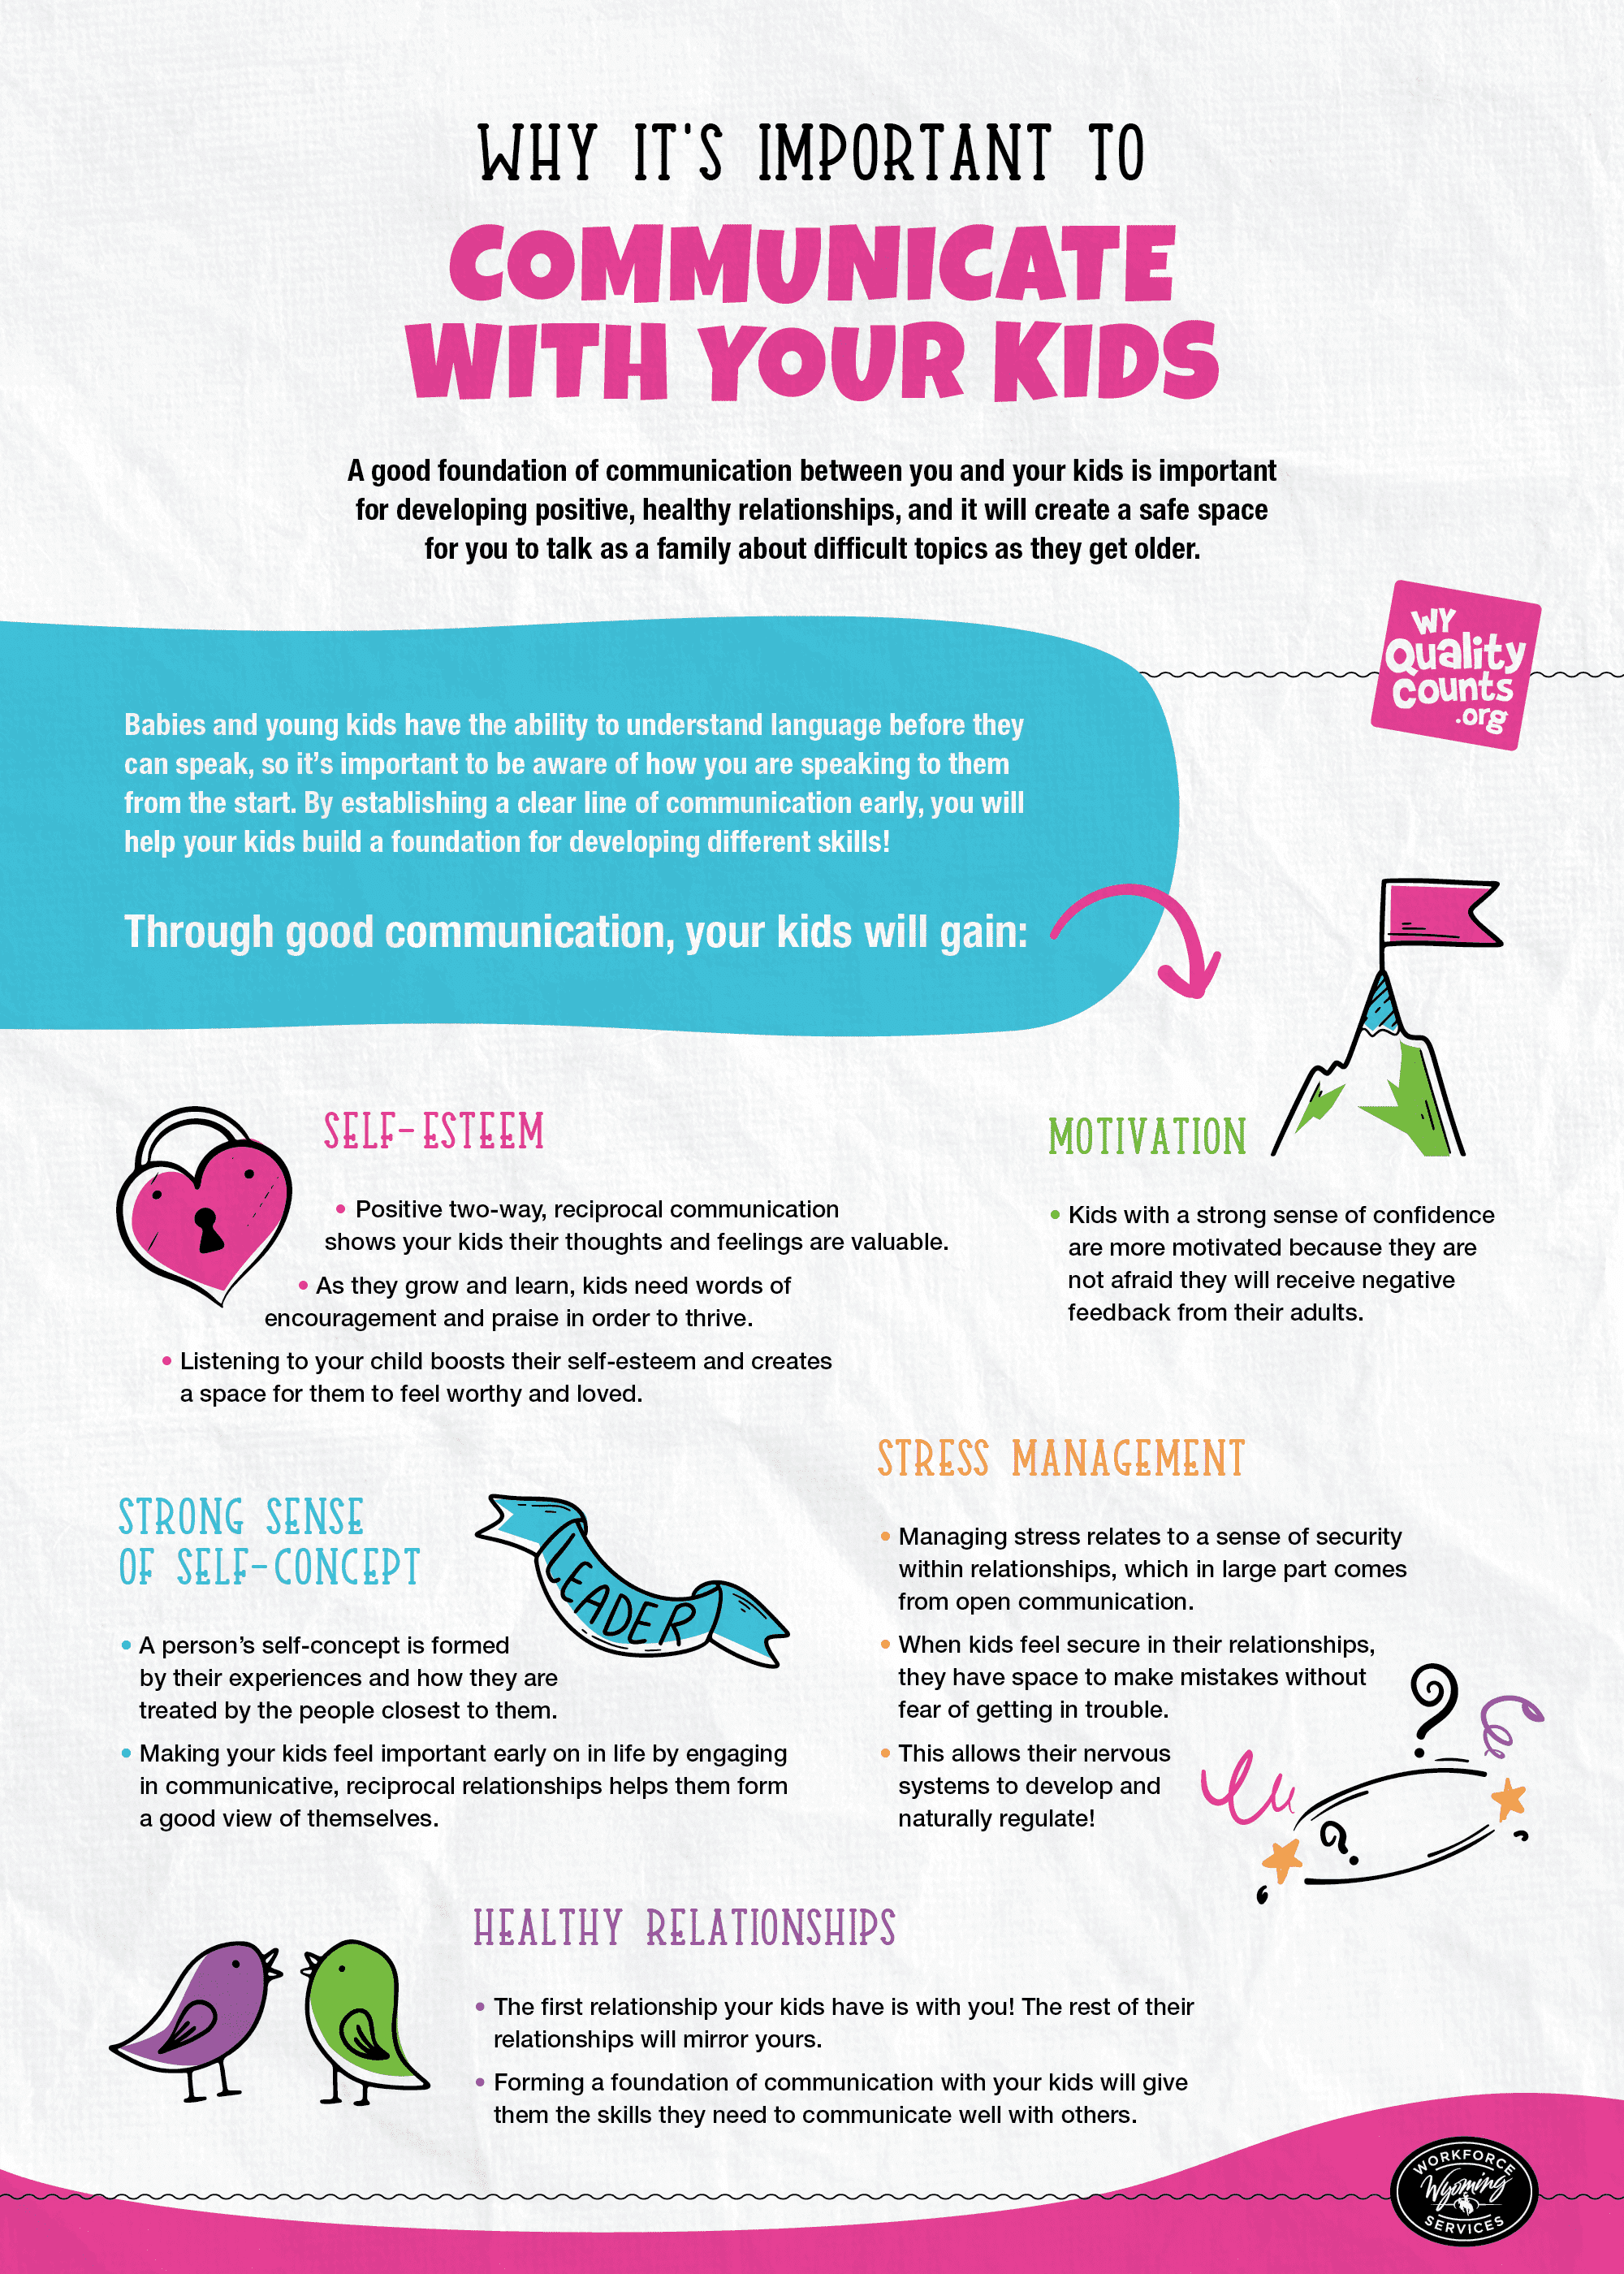 Why It’s Important to Communicate with Your Kids